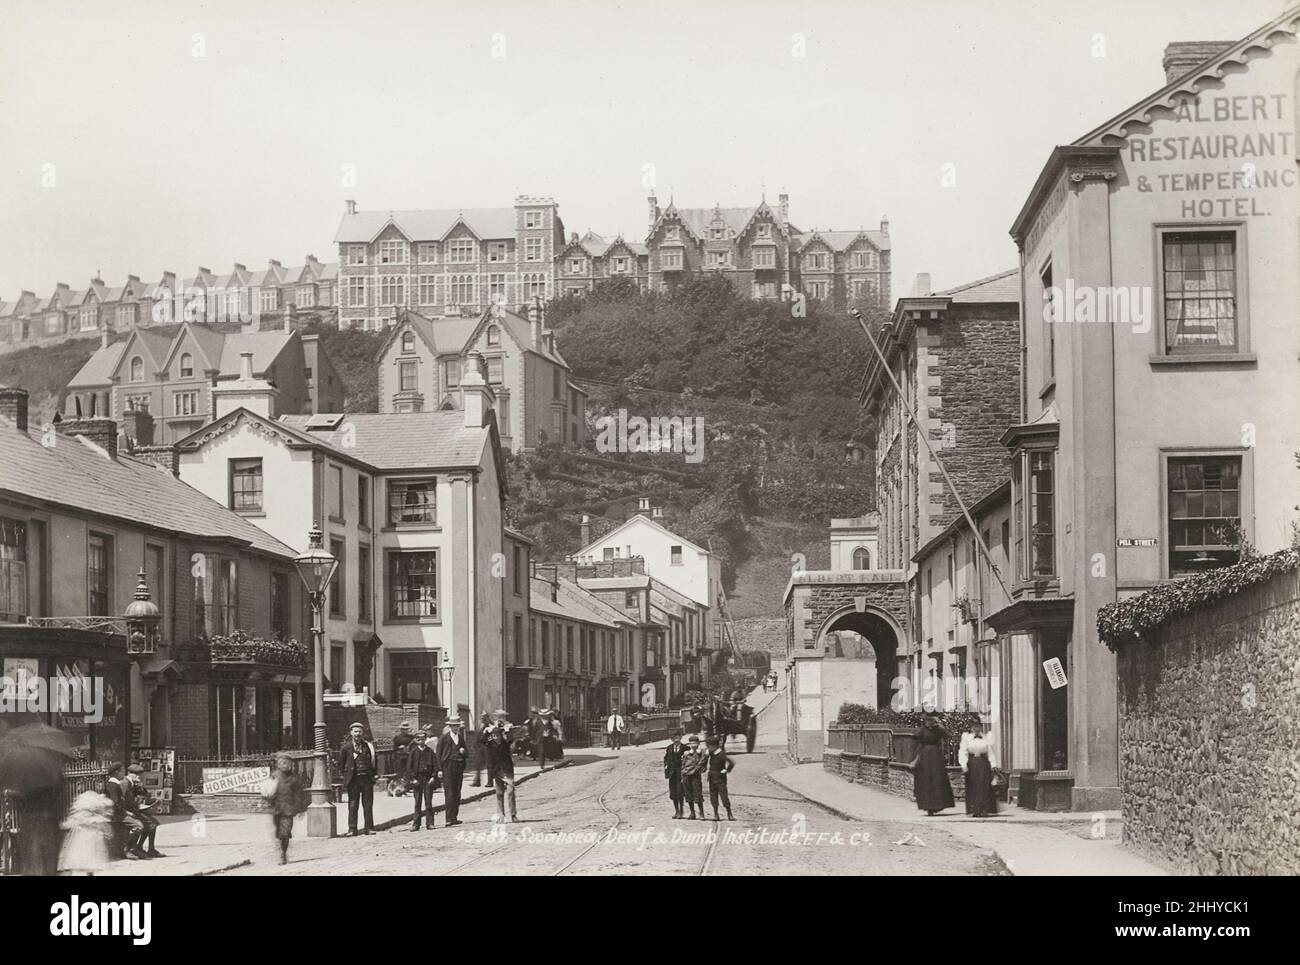 Vintage photograph, late 19th, early 20th century, view of Deaf & Dumb Institute, Swansea, Wales Stock Photo